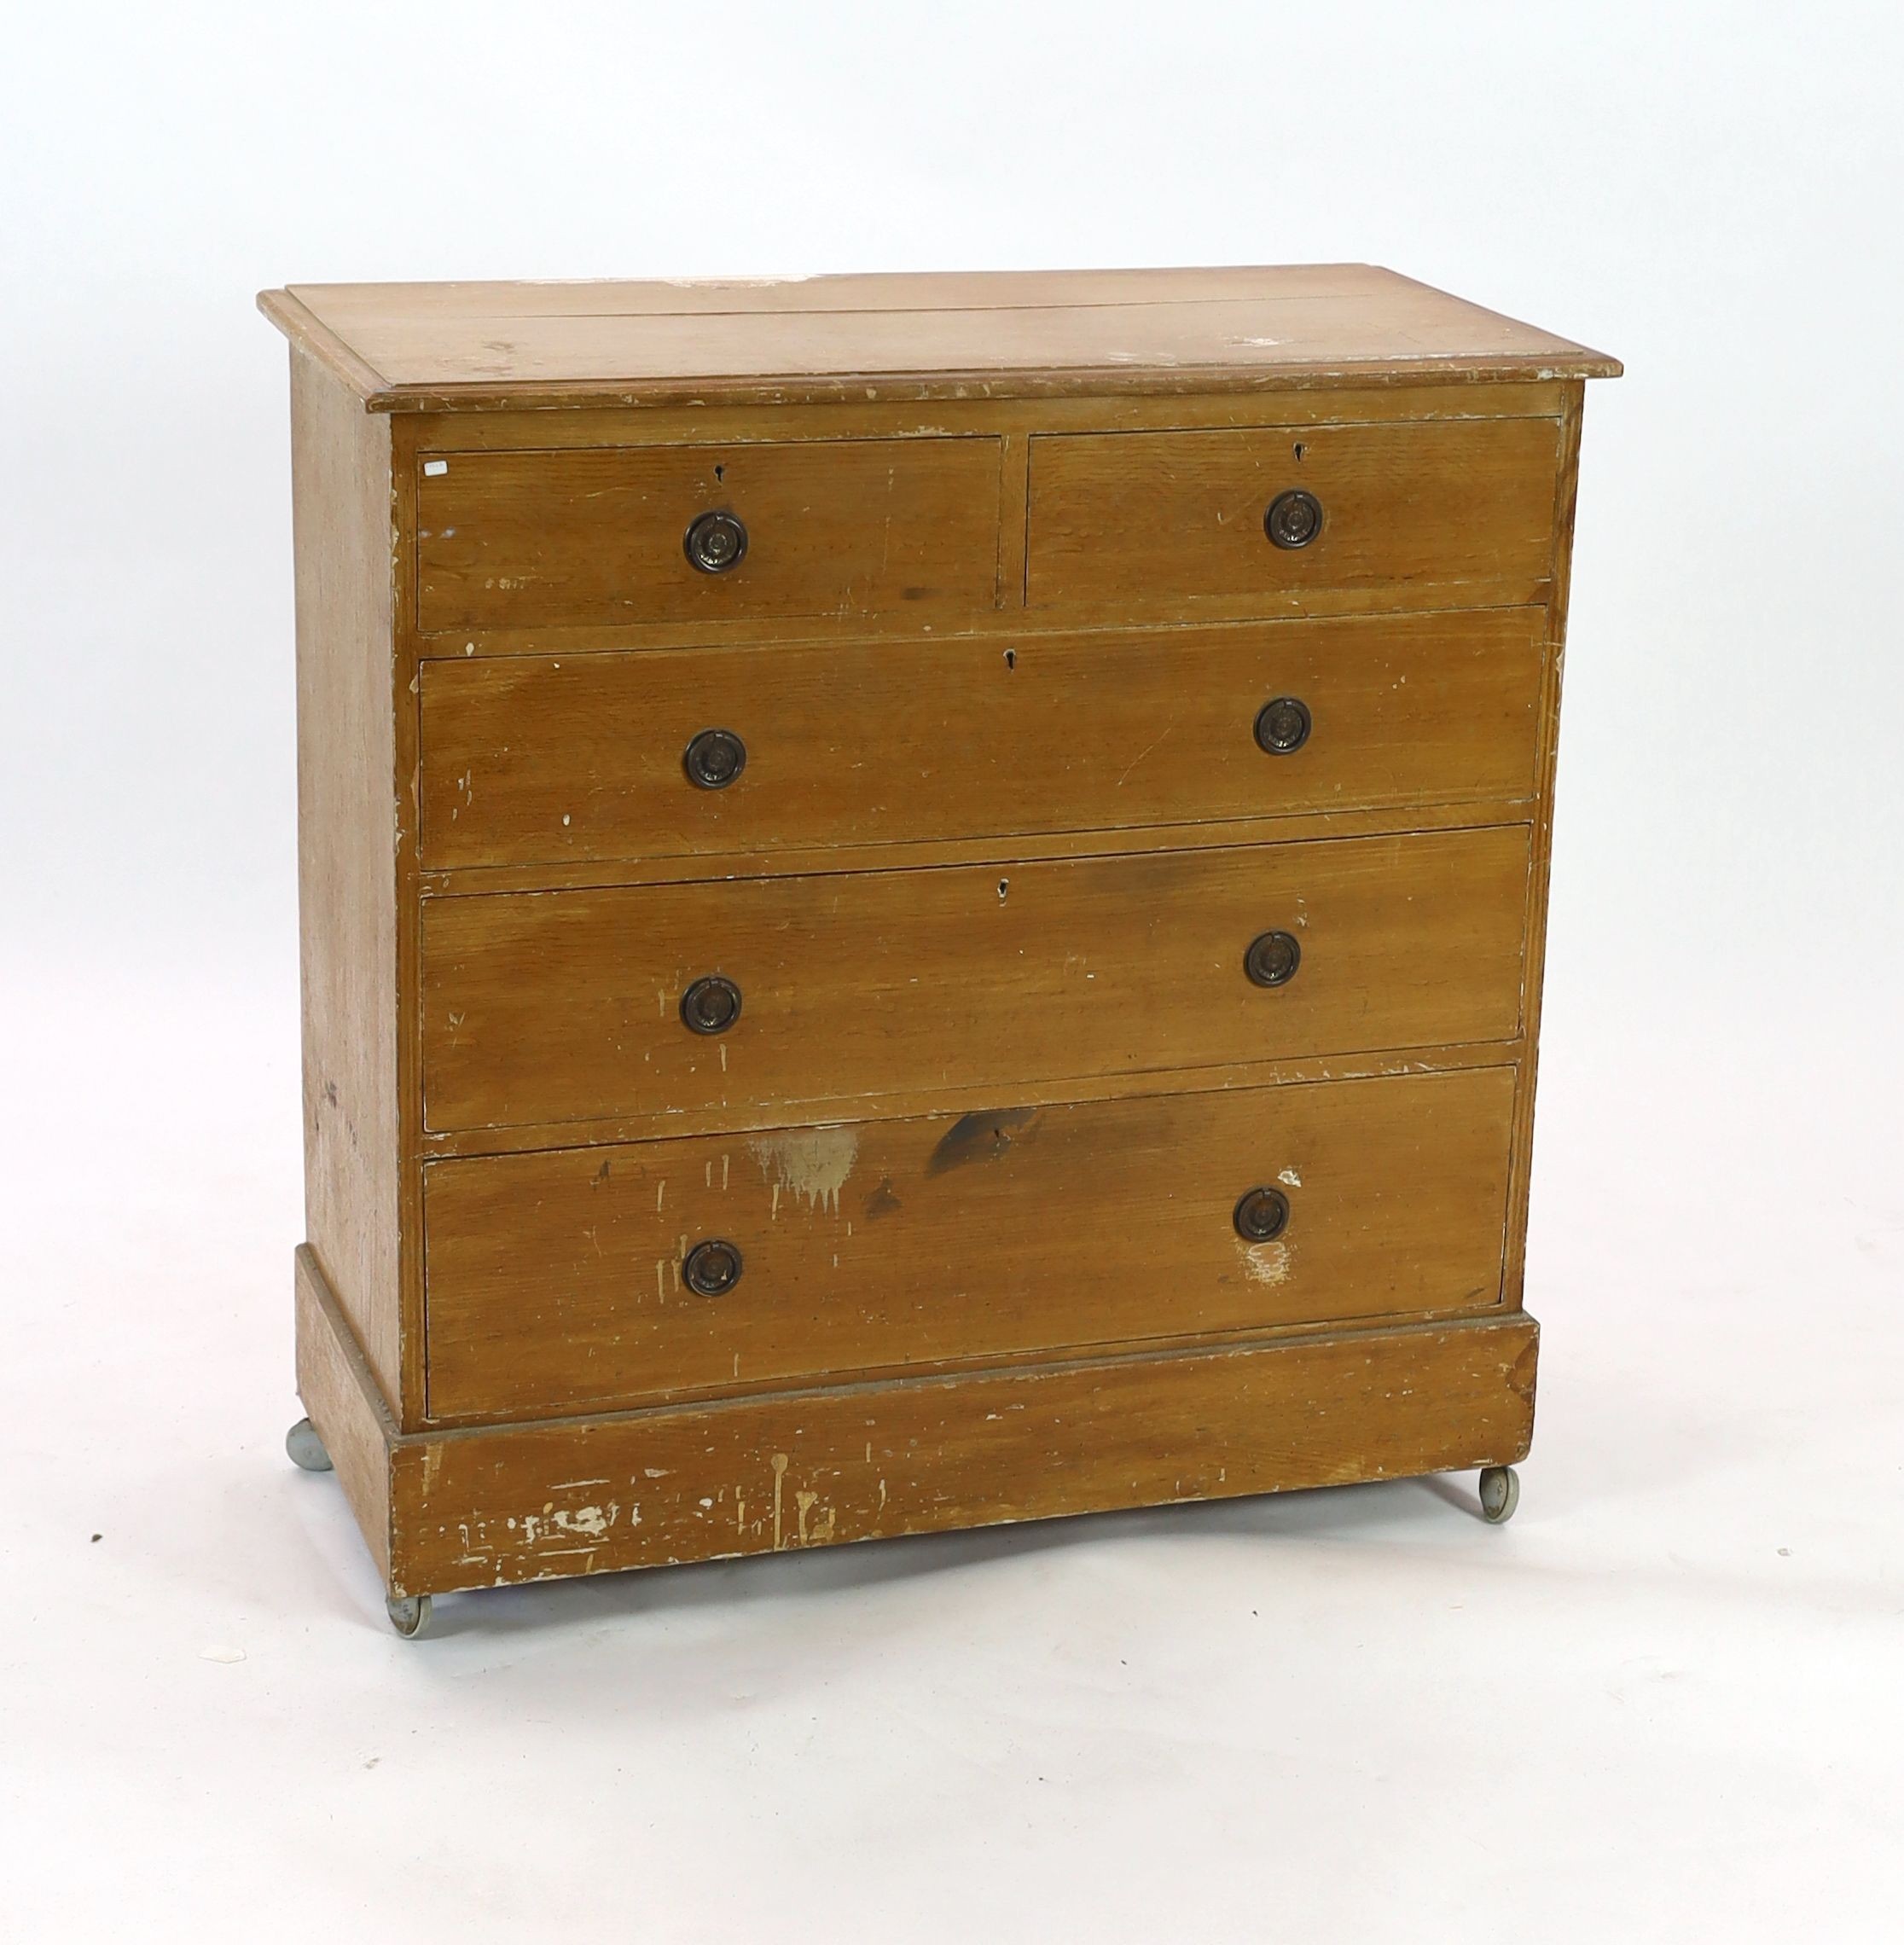 A Victorian pine chest, with painted grain, width 101cm depth 47cm height 102cm